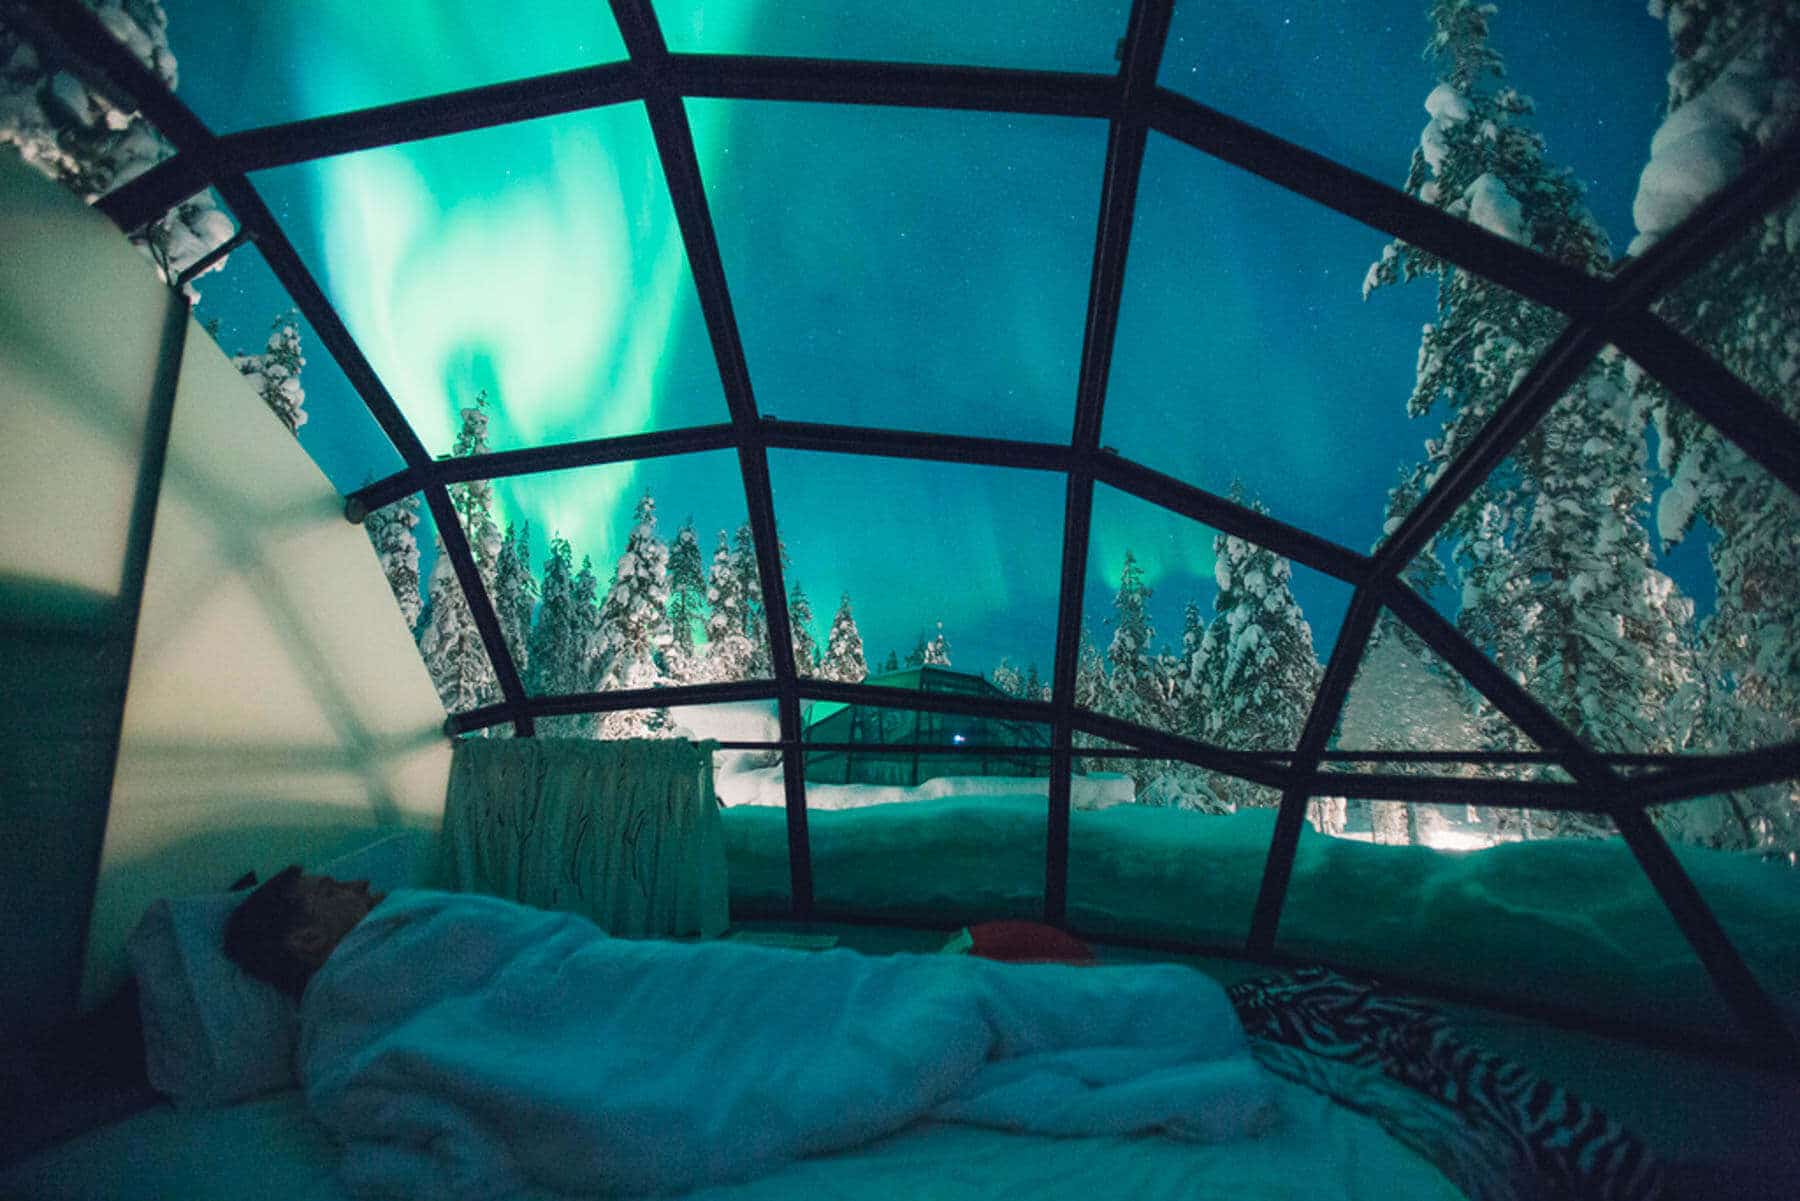 The story of gazing at Northern lights from your private glass igloo